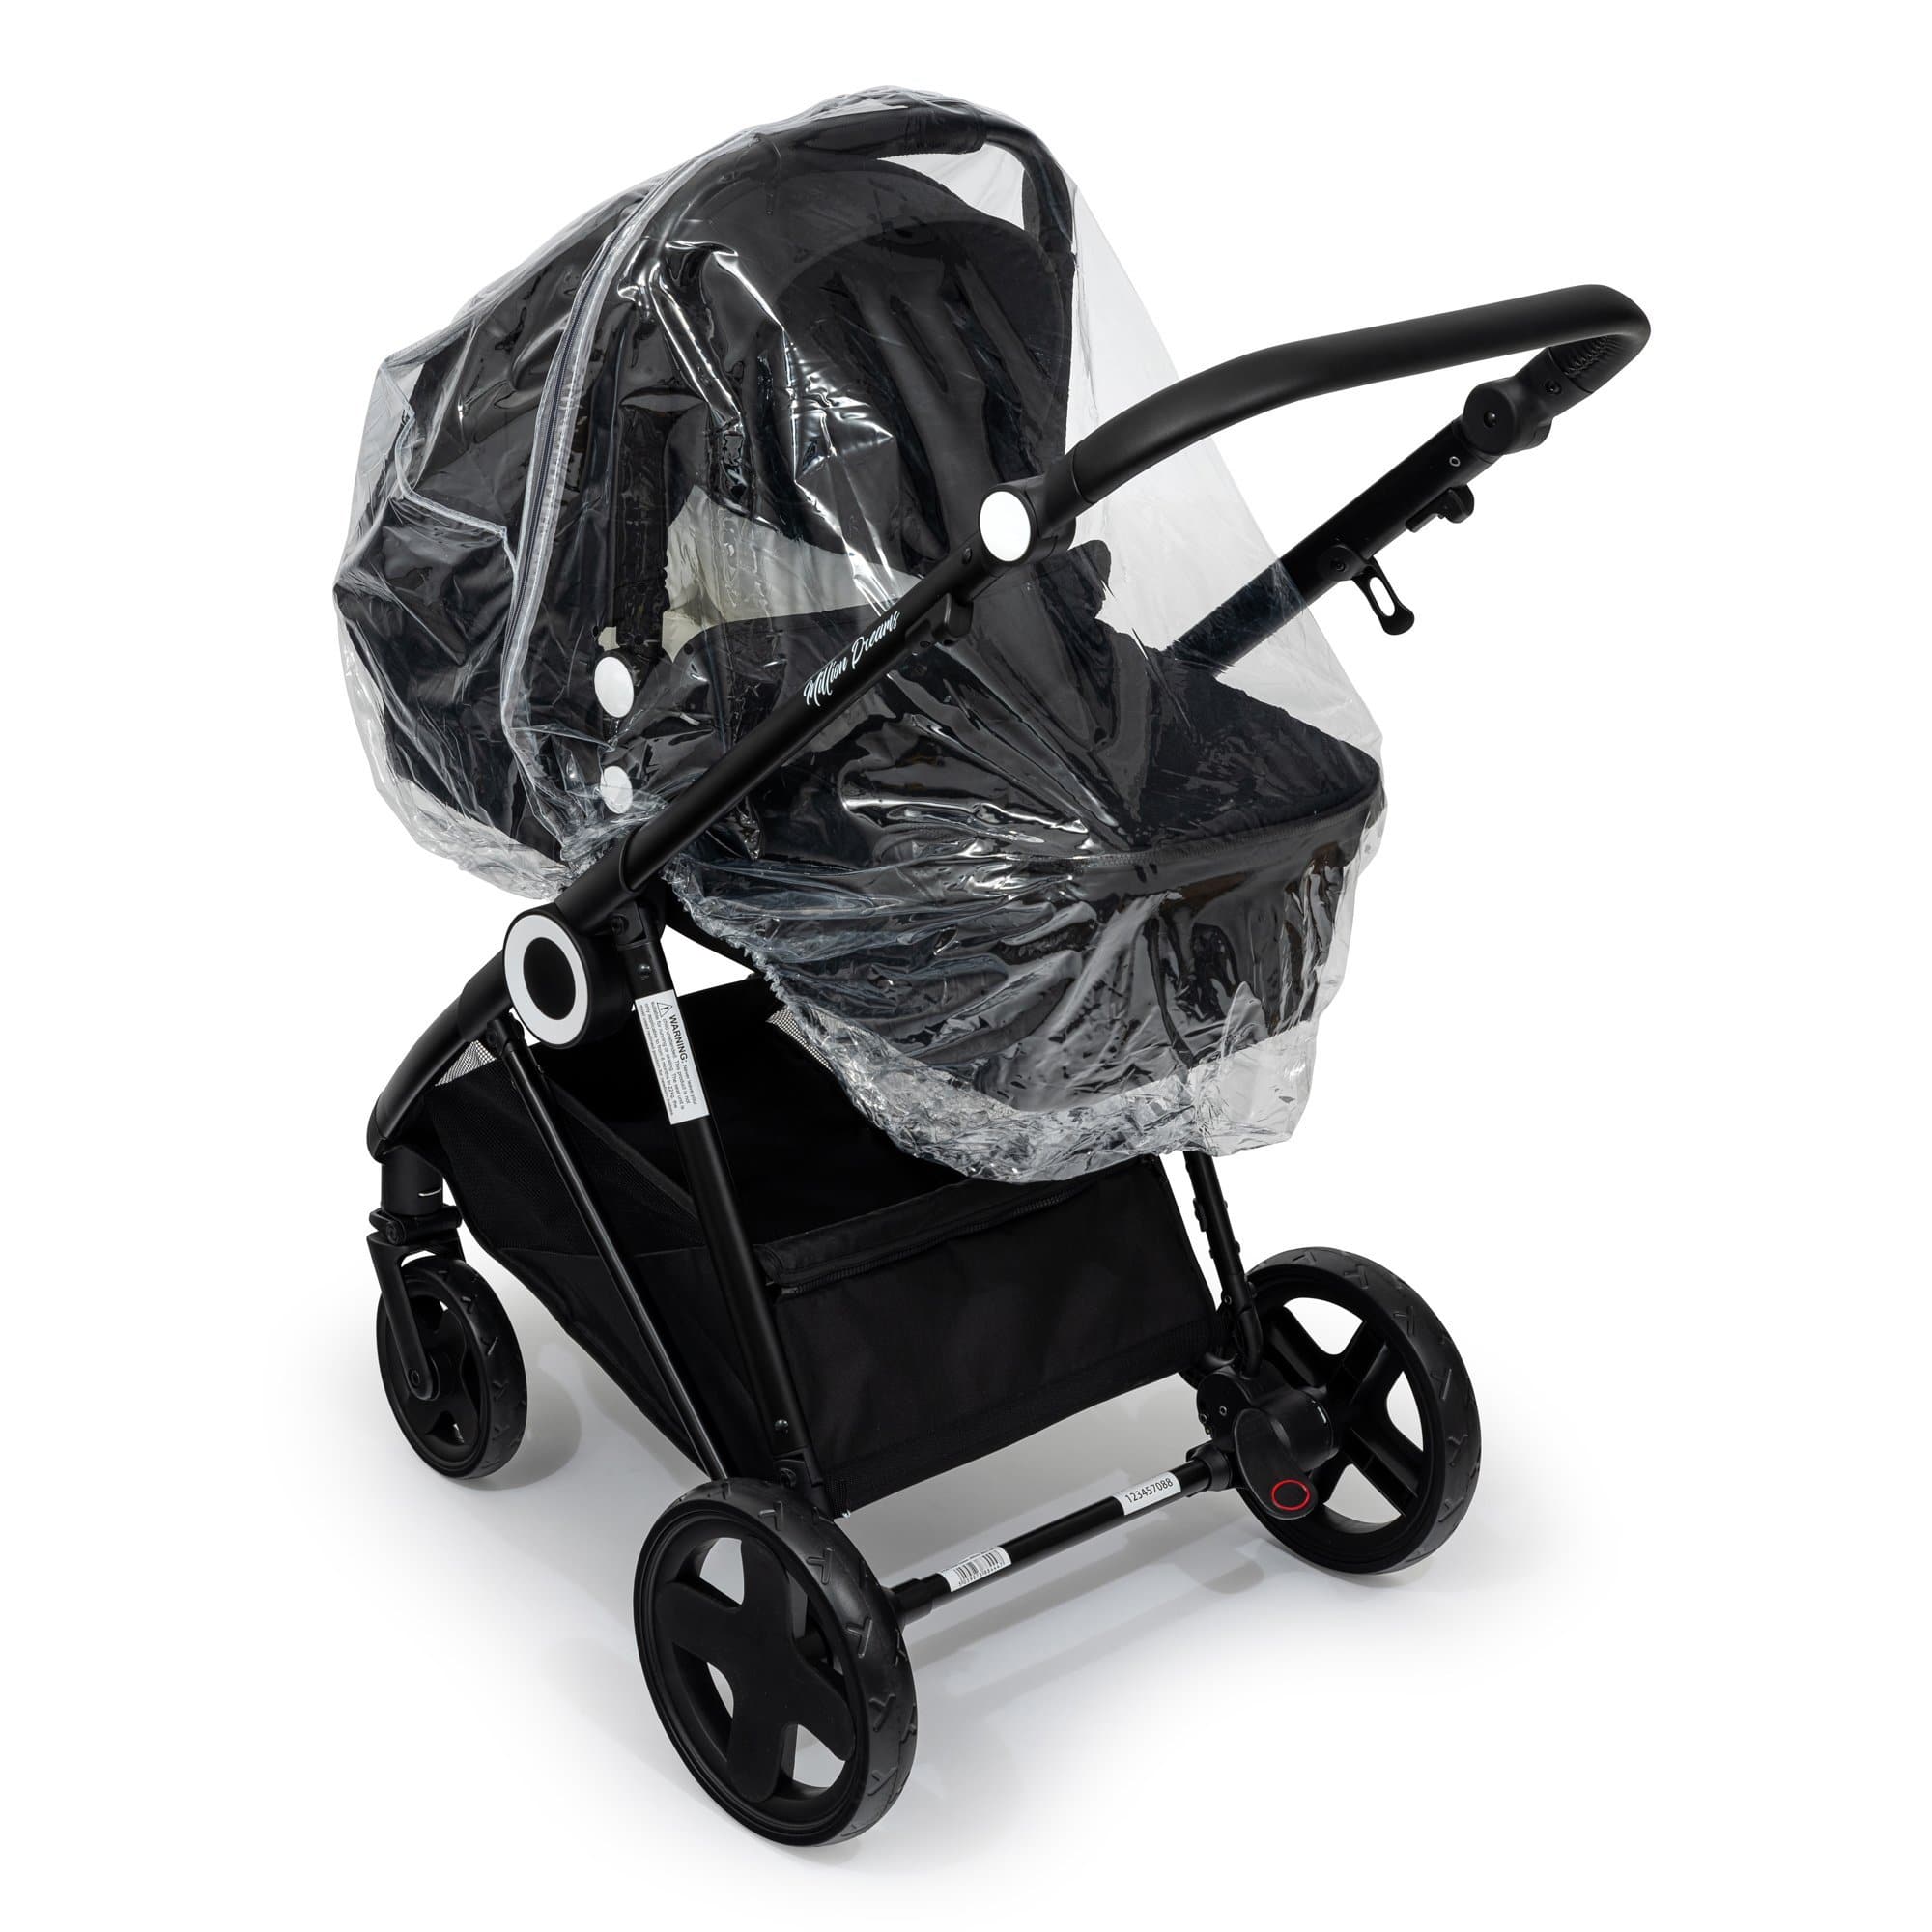 2 in 1 Rain Cover Compatible with Uppababy - Fits All Models - For Your Little One